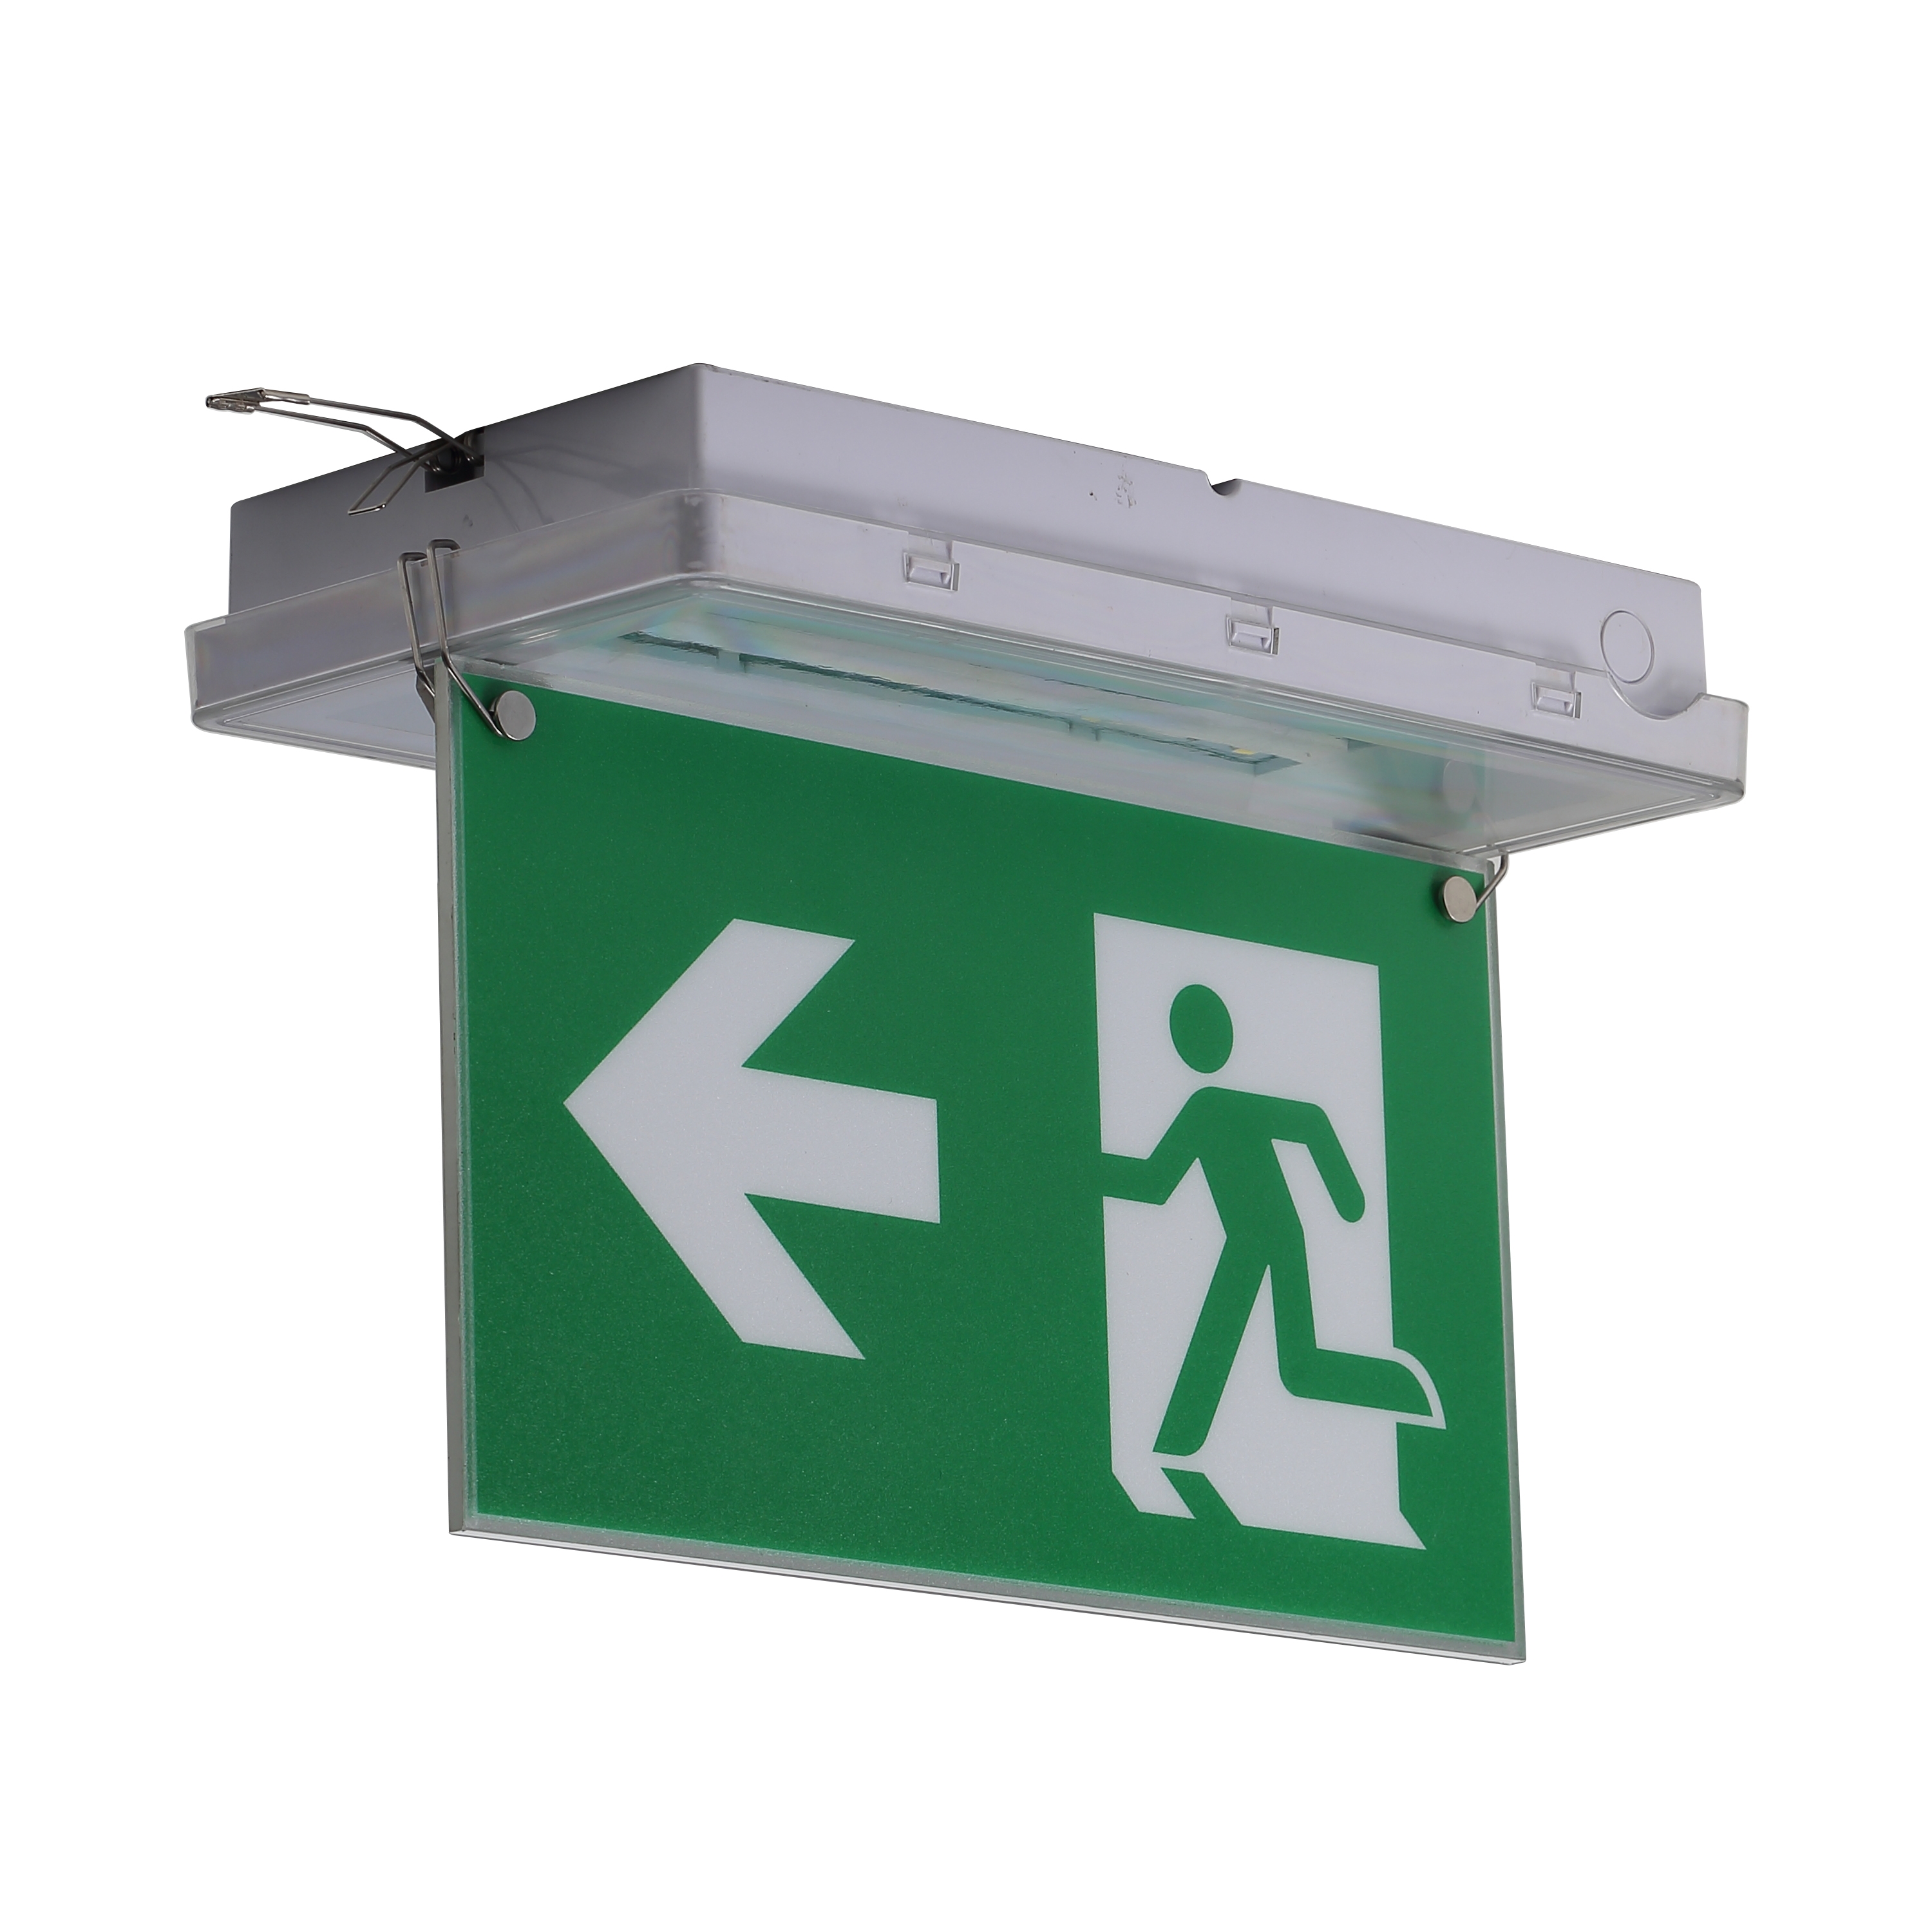 IP65 Waterproof LED Exit Double-side Sign Ceiling Recessed 5W Emergency Light